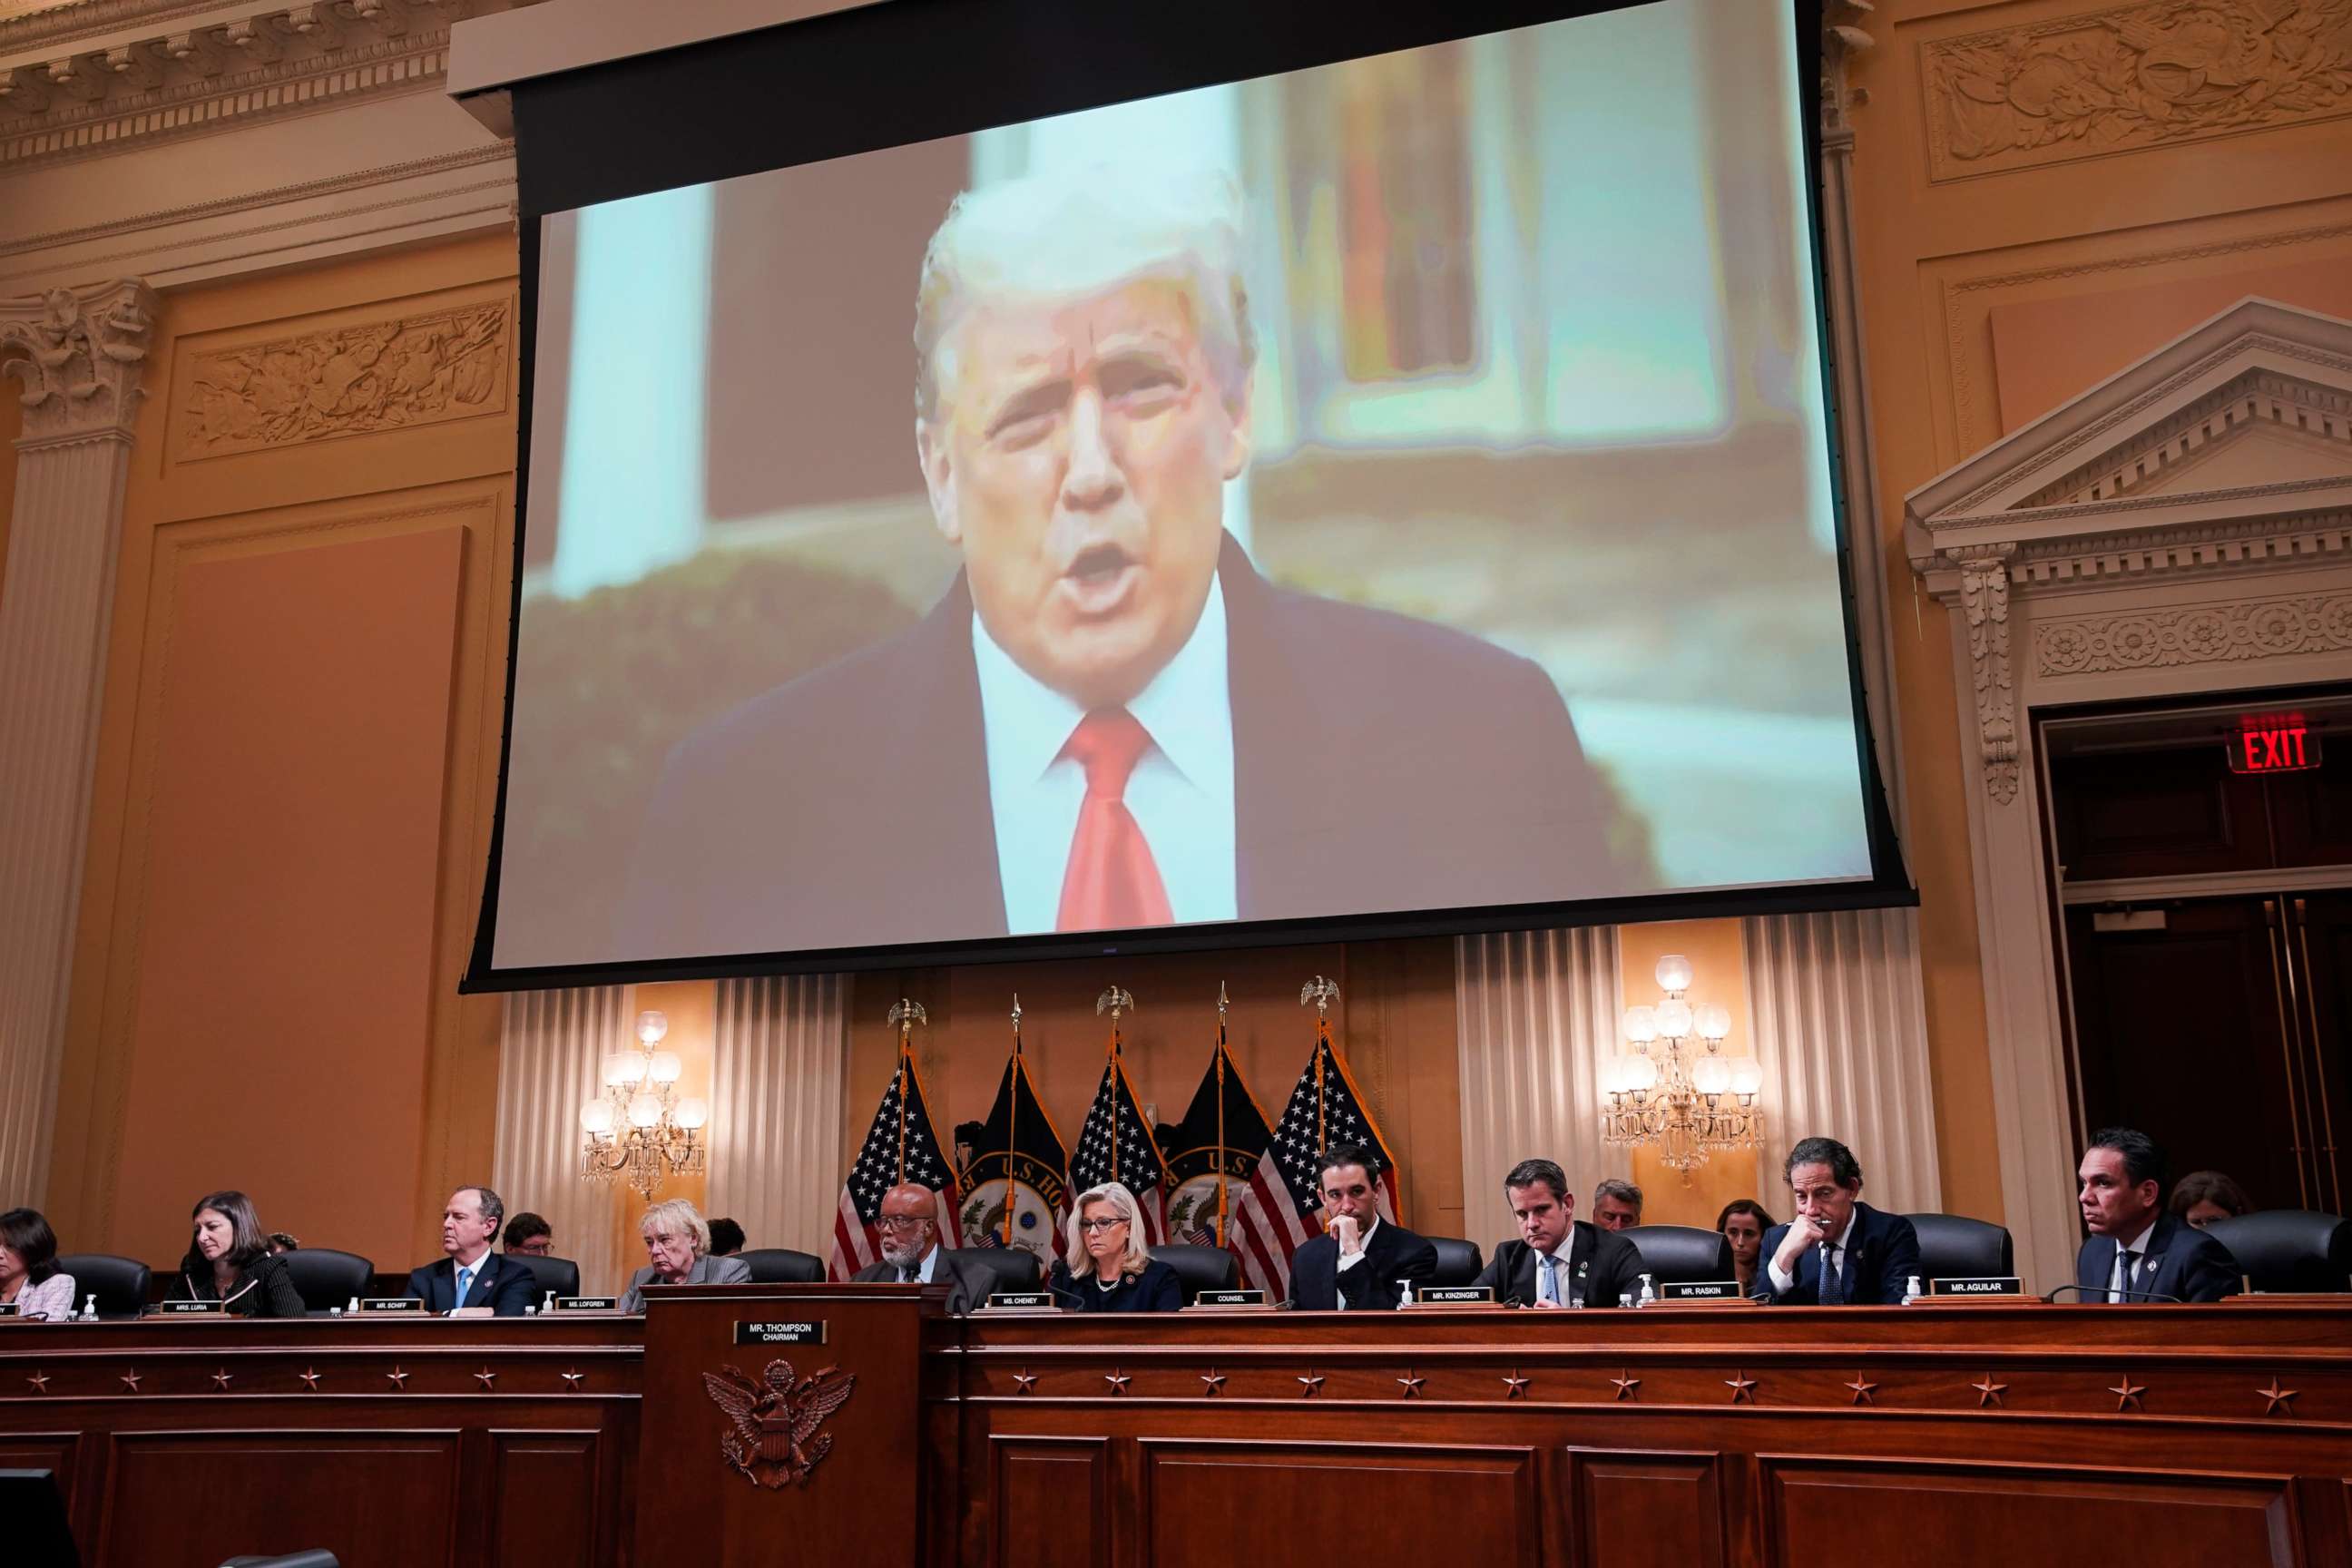 PHOTO: A video of former US President Donald Trump displayed on a screen during a hearing of the Select Committee to Investigate the January 6th Attack on Capitol in Washington, June 28, 2022.